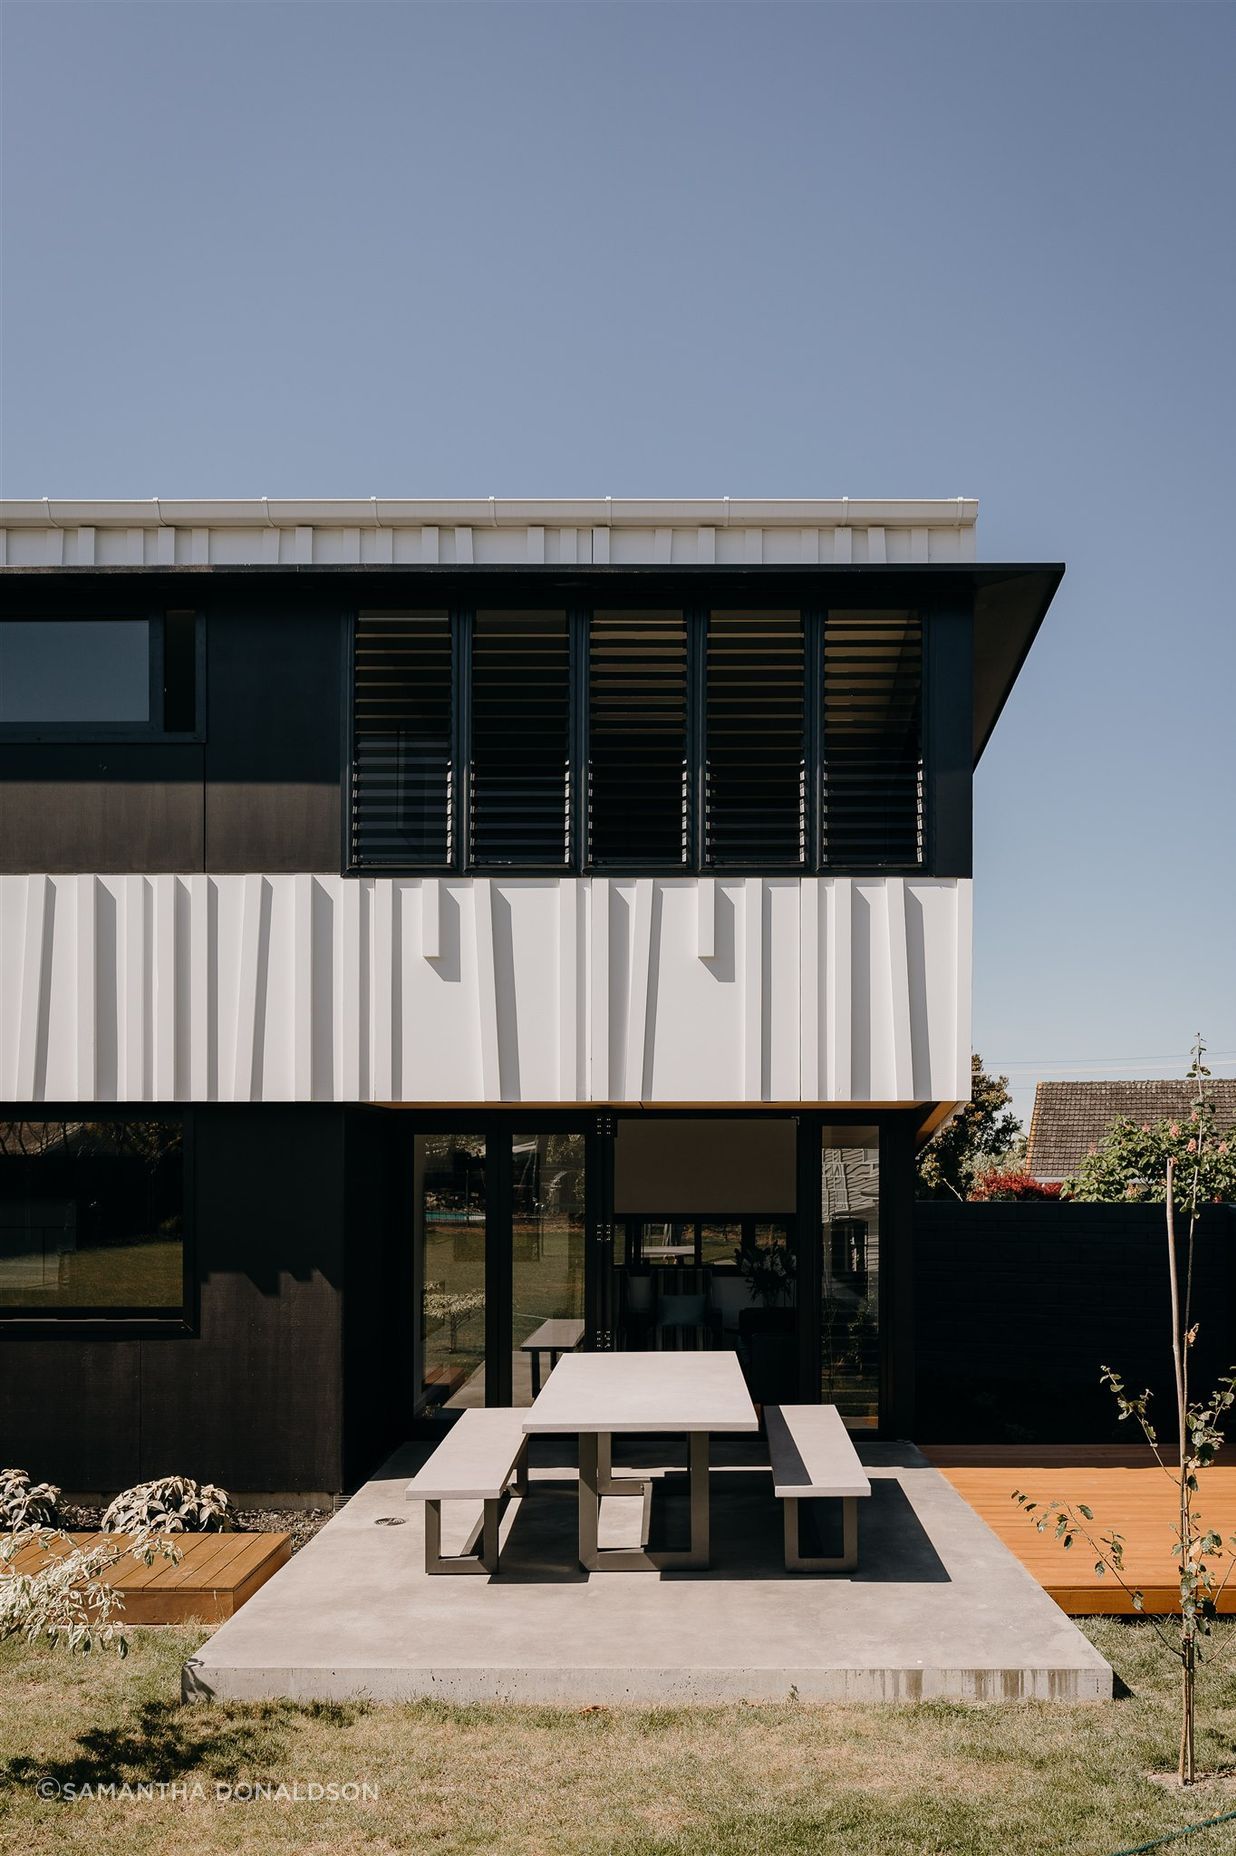 The main living area opens onto the private, rear backyard, whose central space is atop a concrete slab met on either side by timber decking that runs the length of this long, narrow house